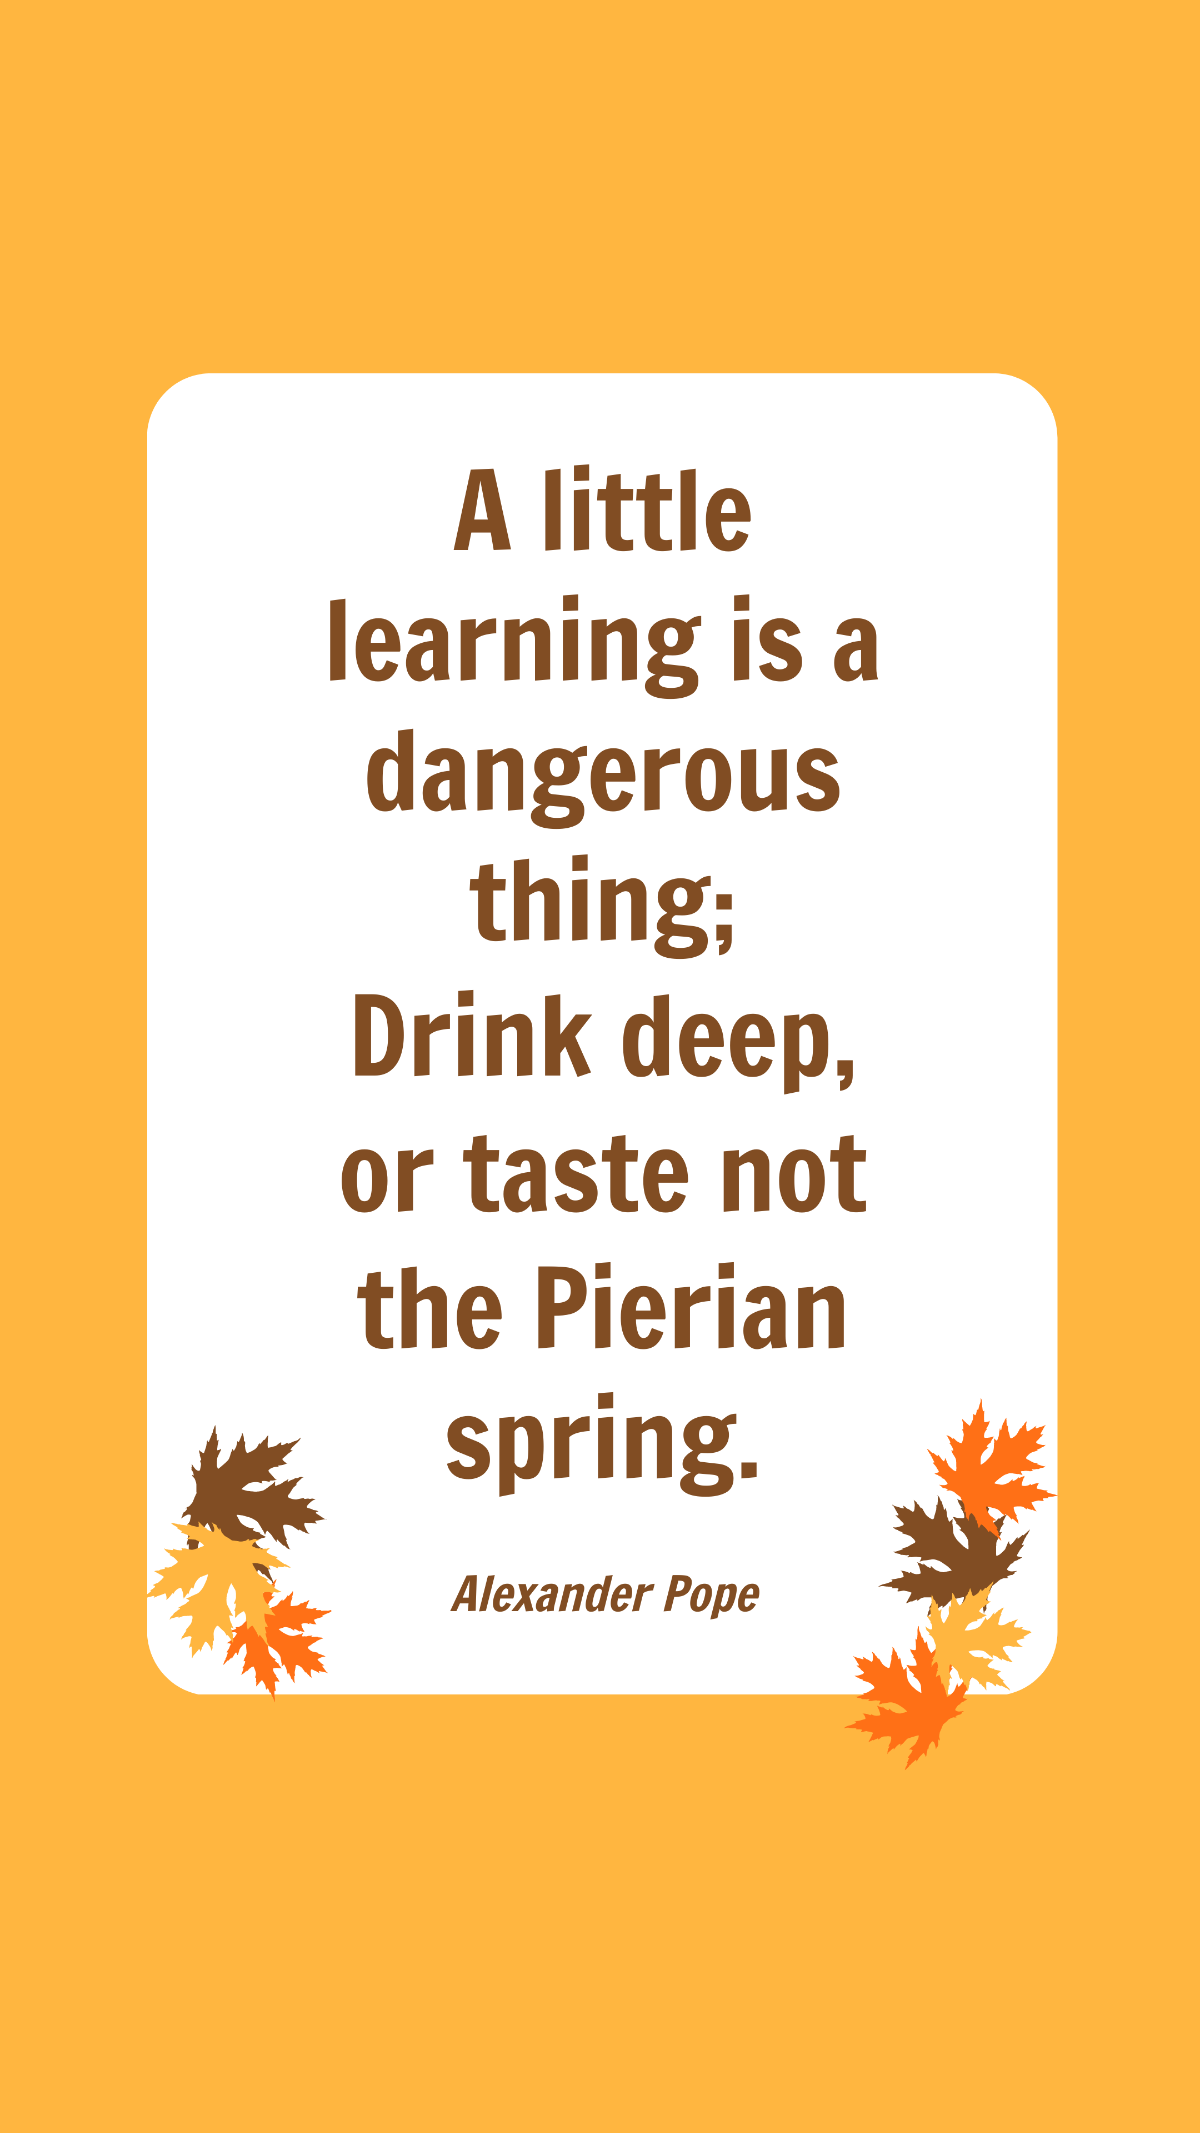 Alexander Pope - A little learning is a dangerous thing; Drink deep, or taste not the Pierian spring. Template